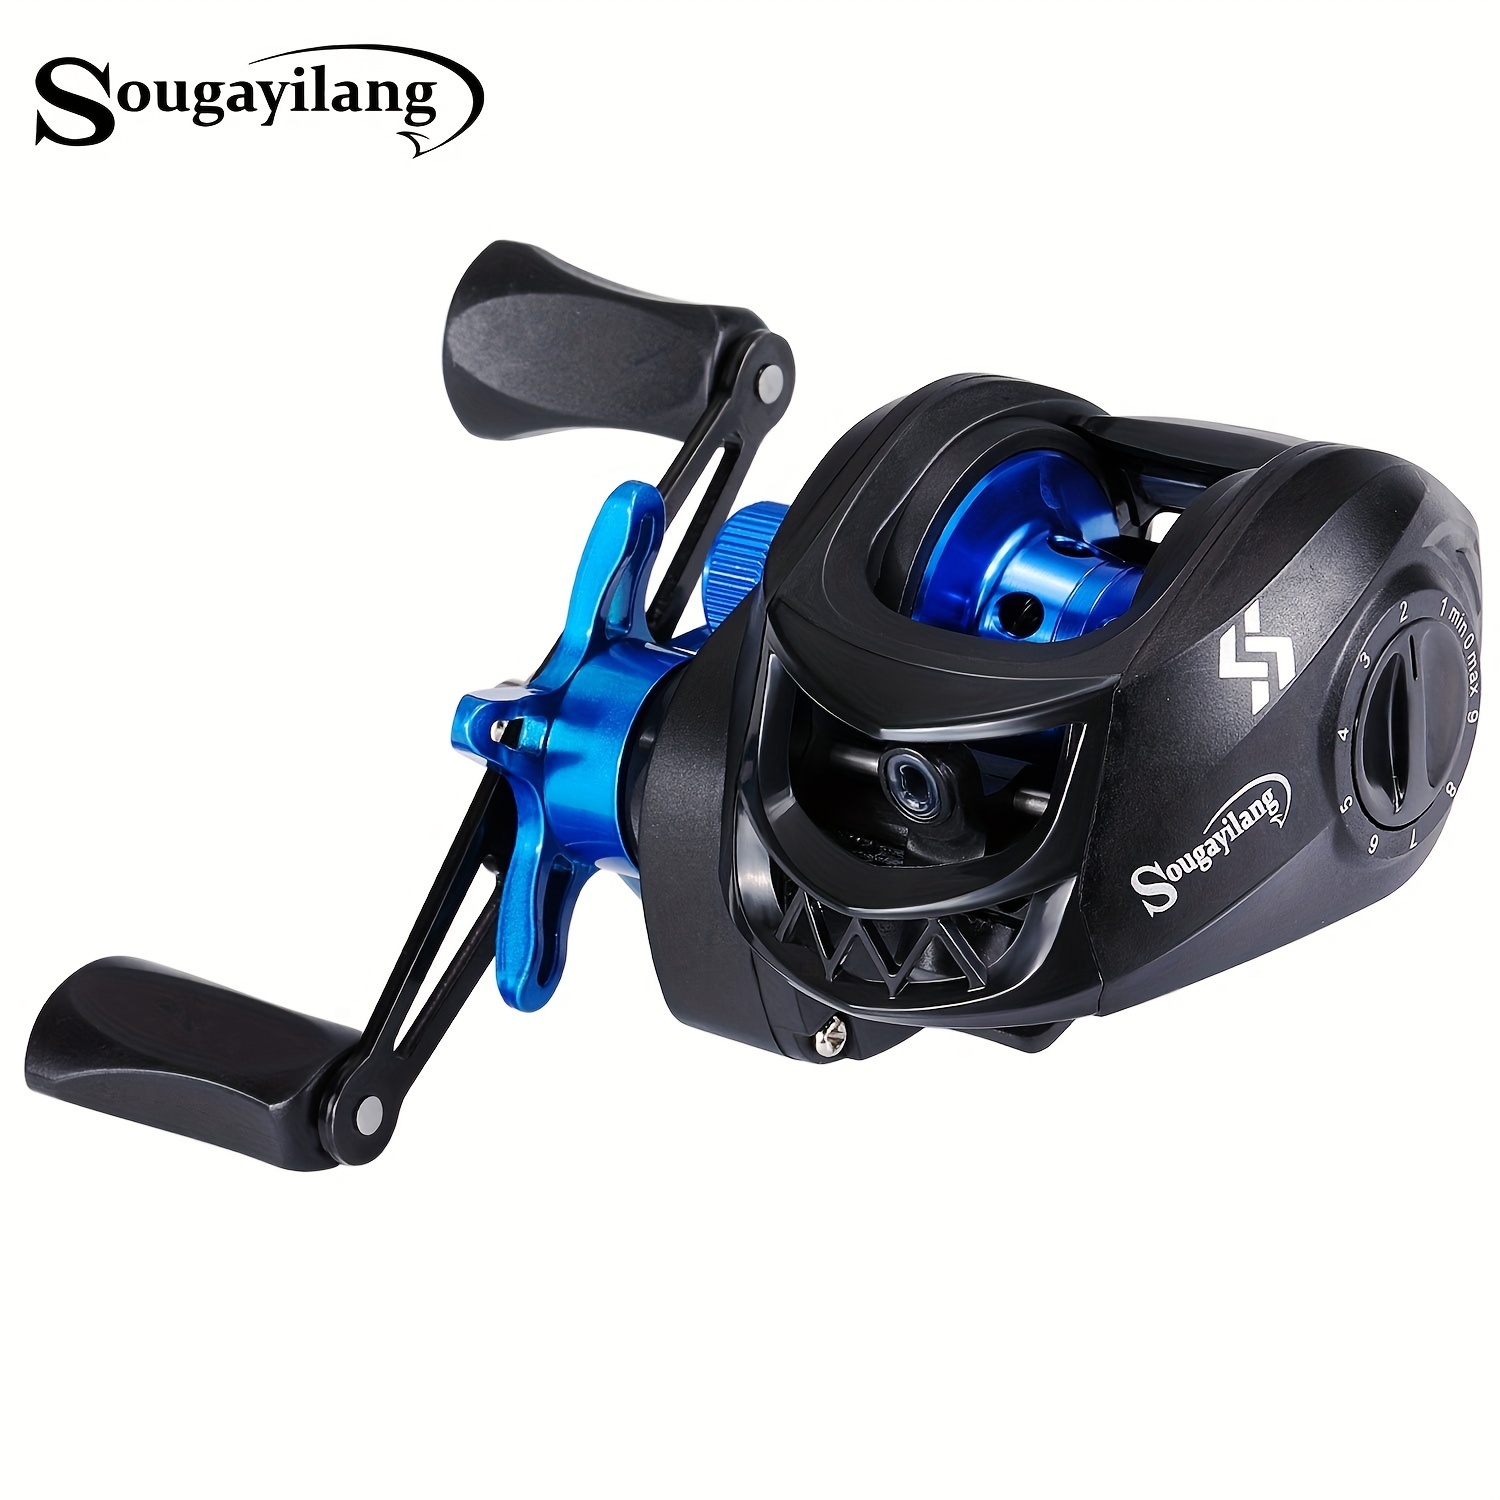 * Baitcasting Reel Left/Right With 7.2:1 Gear Ratio Bait Casting Reels